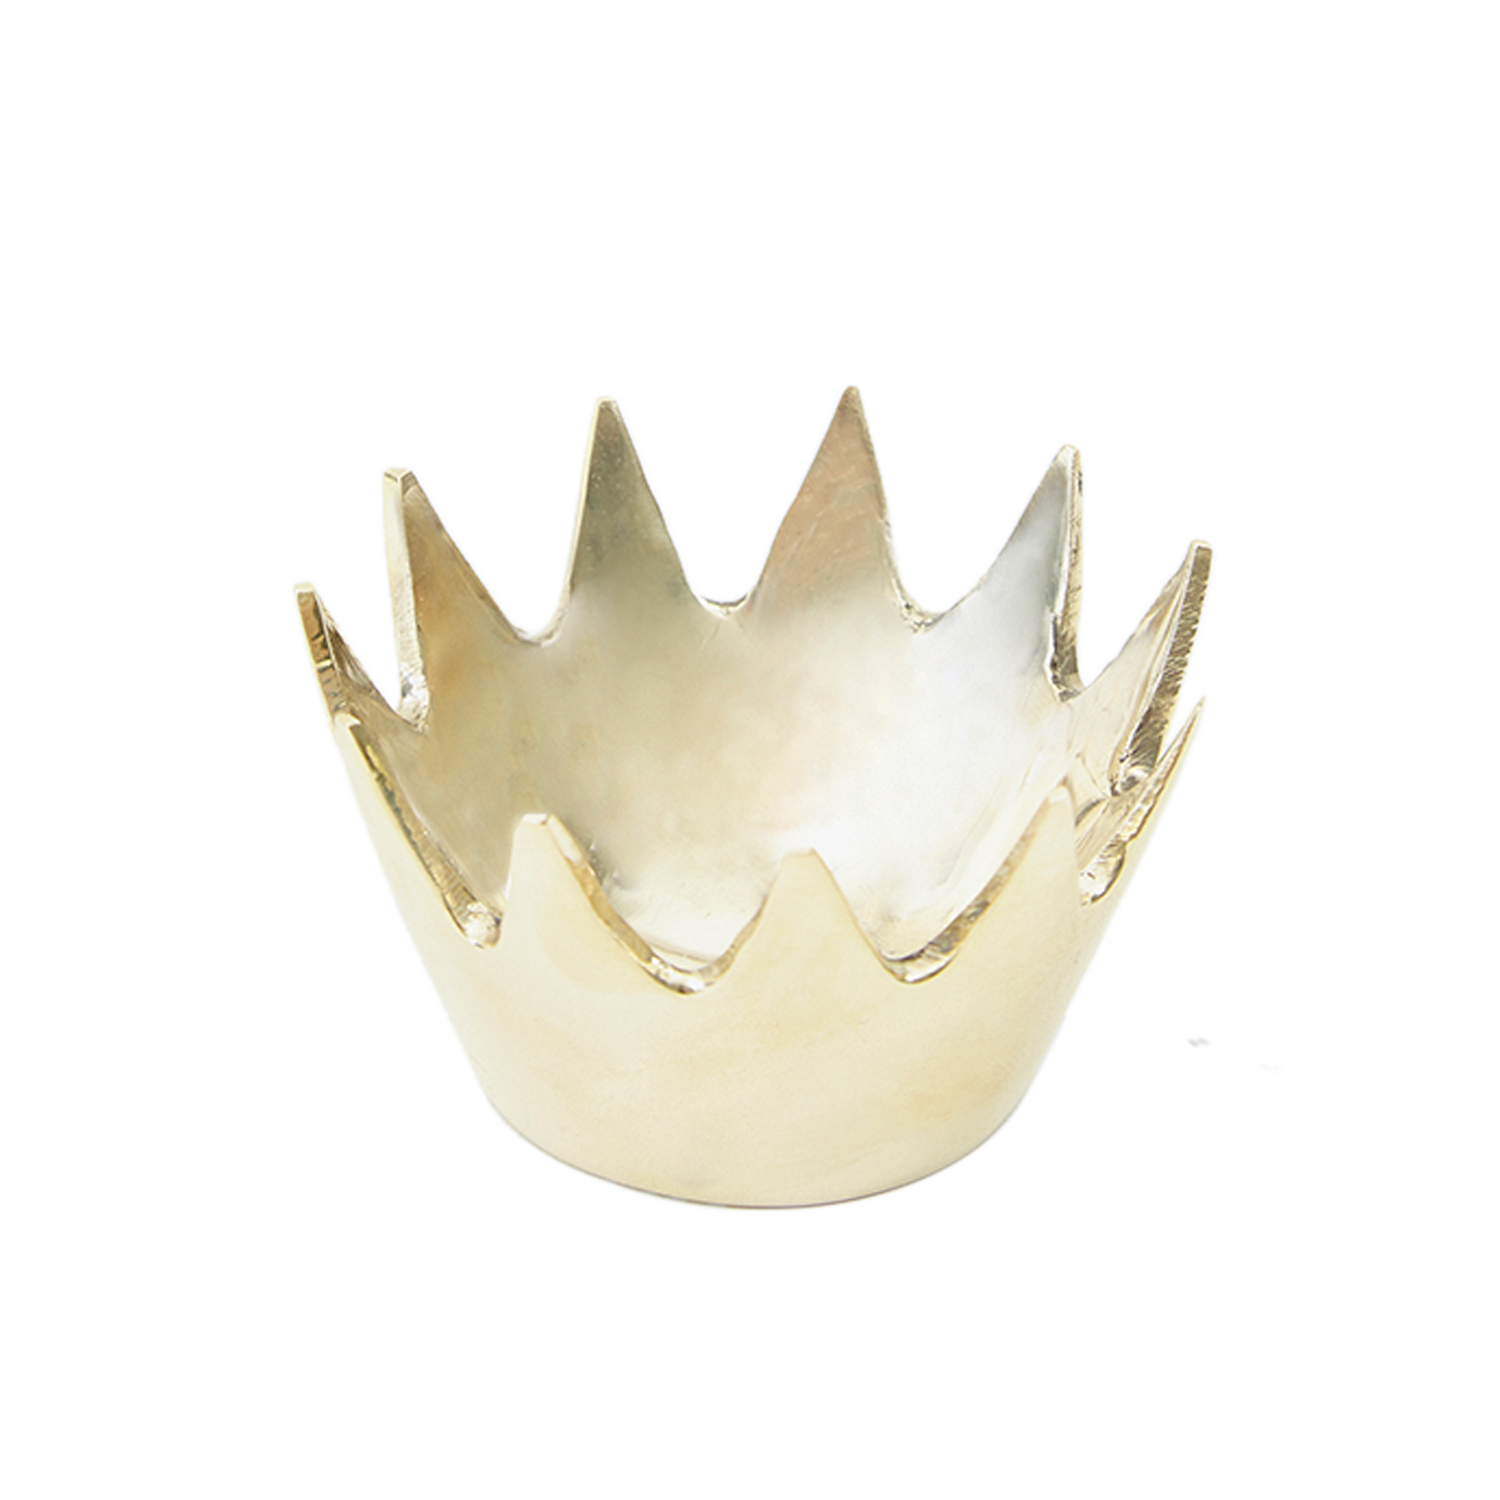 #3600-1 Solid Brass Crown Paperweight